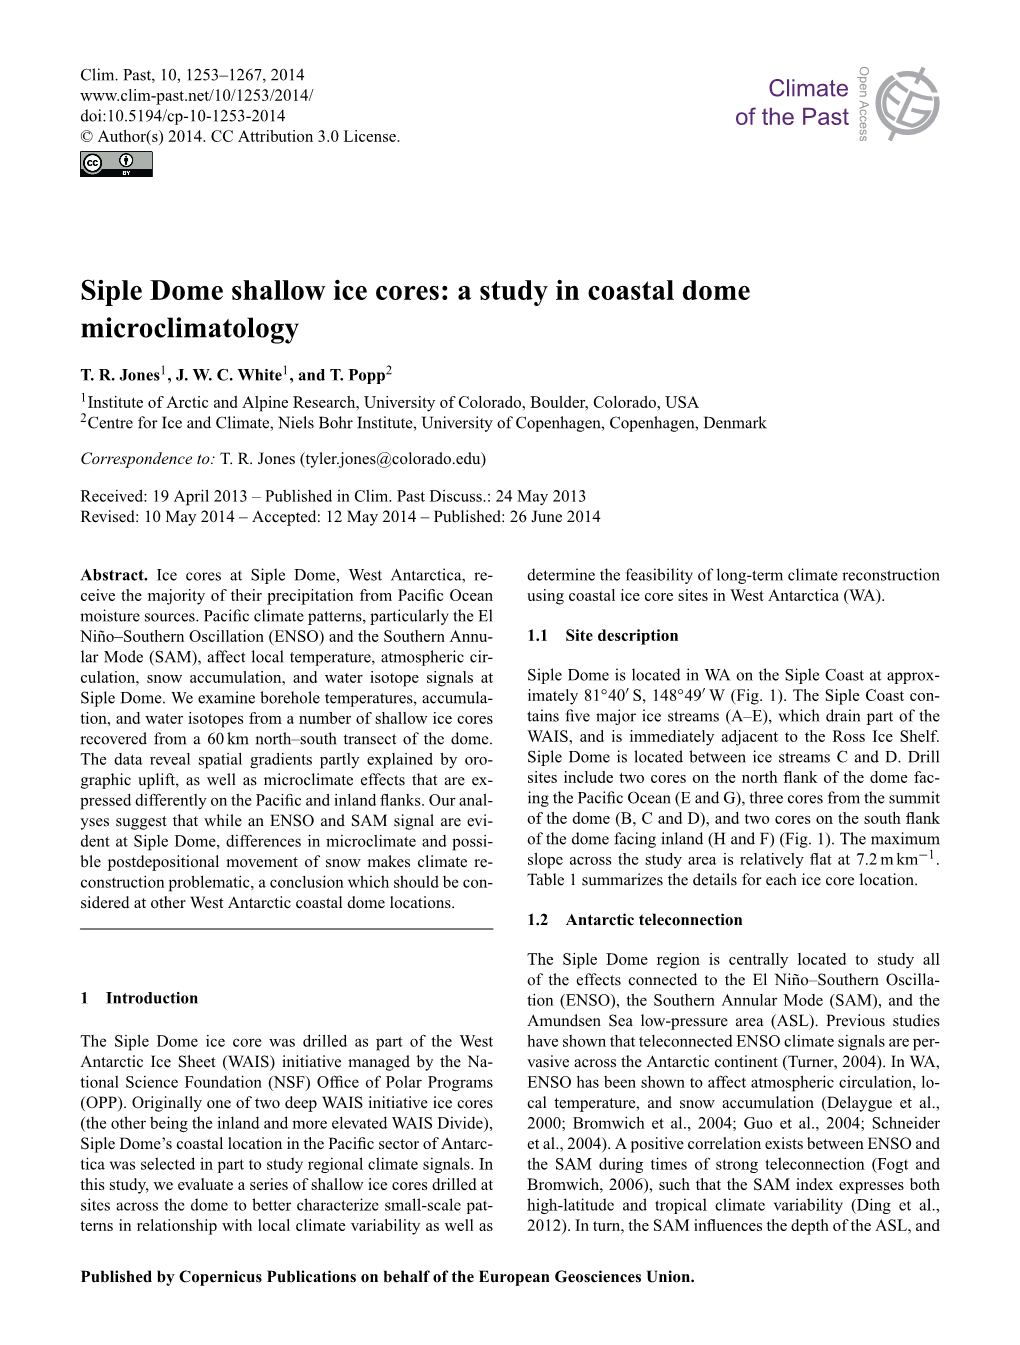 Siple Dome Shallow Ice Cores: a Study in Coastal Dome Microclimatology